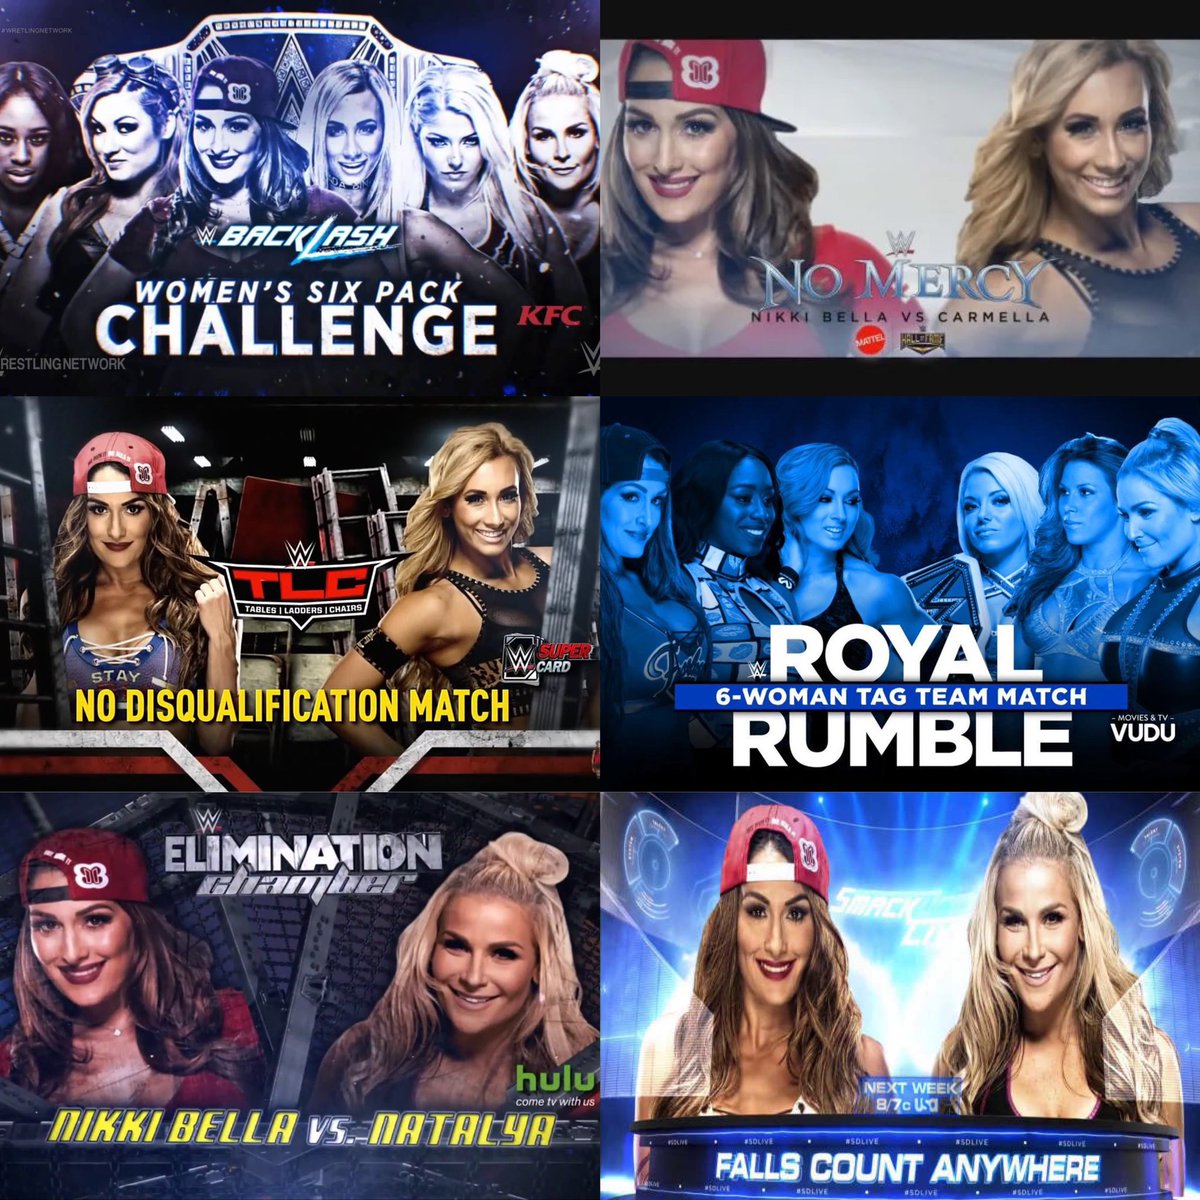 I ain’t gonna hold you, but Nikki Bella didn’t have a single bad match during her 2016-2017 run. Not saying they all were classics but they were all definitely good. https://t.co/hBRGTe1JVd